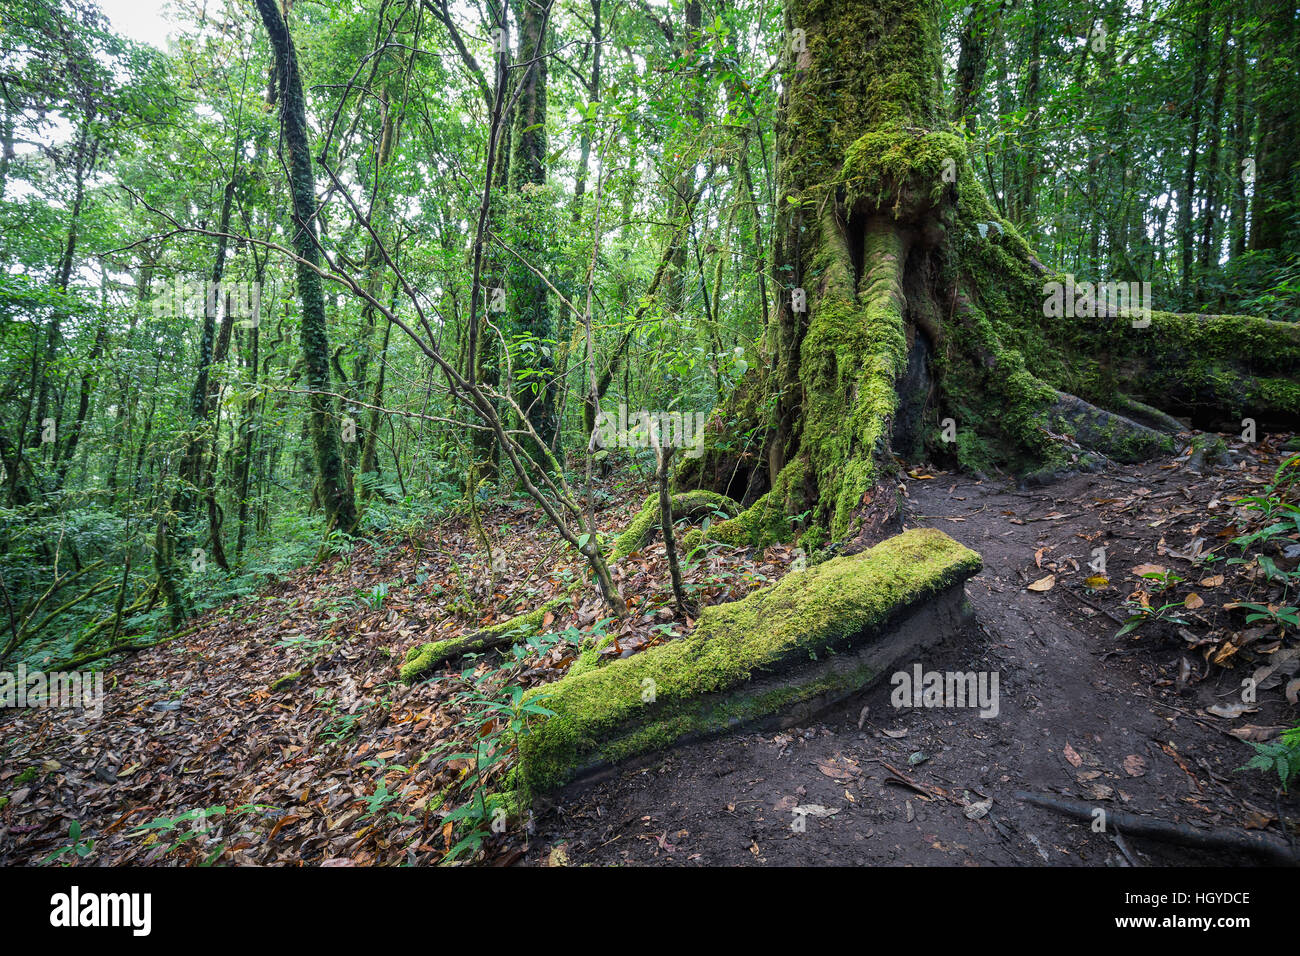 Big tree and green log inside tropical evergreen forest in of Stock